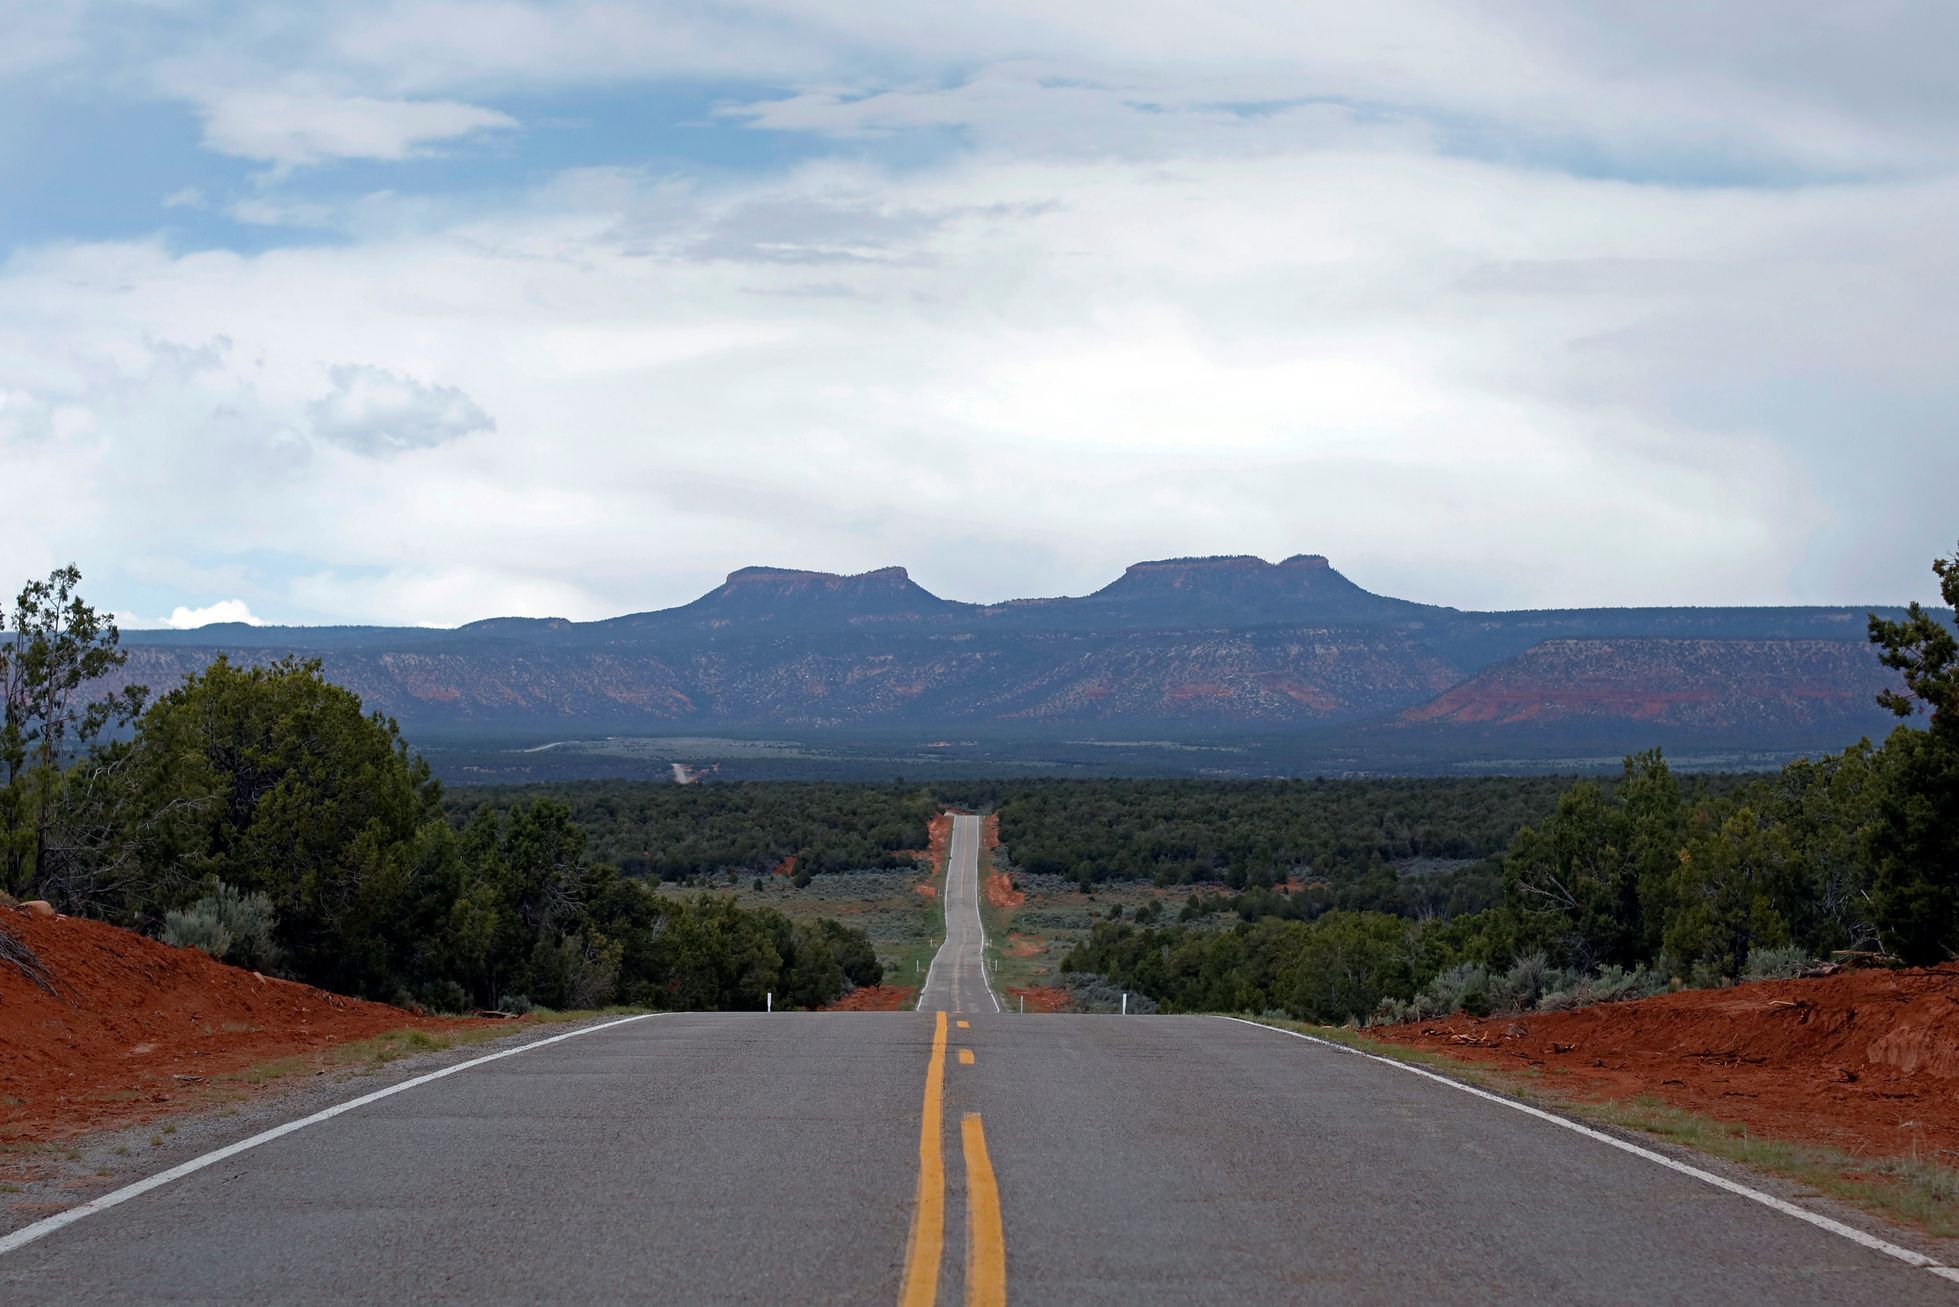 Bears Ears, the twin rock formations which form part of Bears Ears National Monument